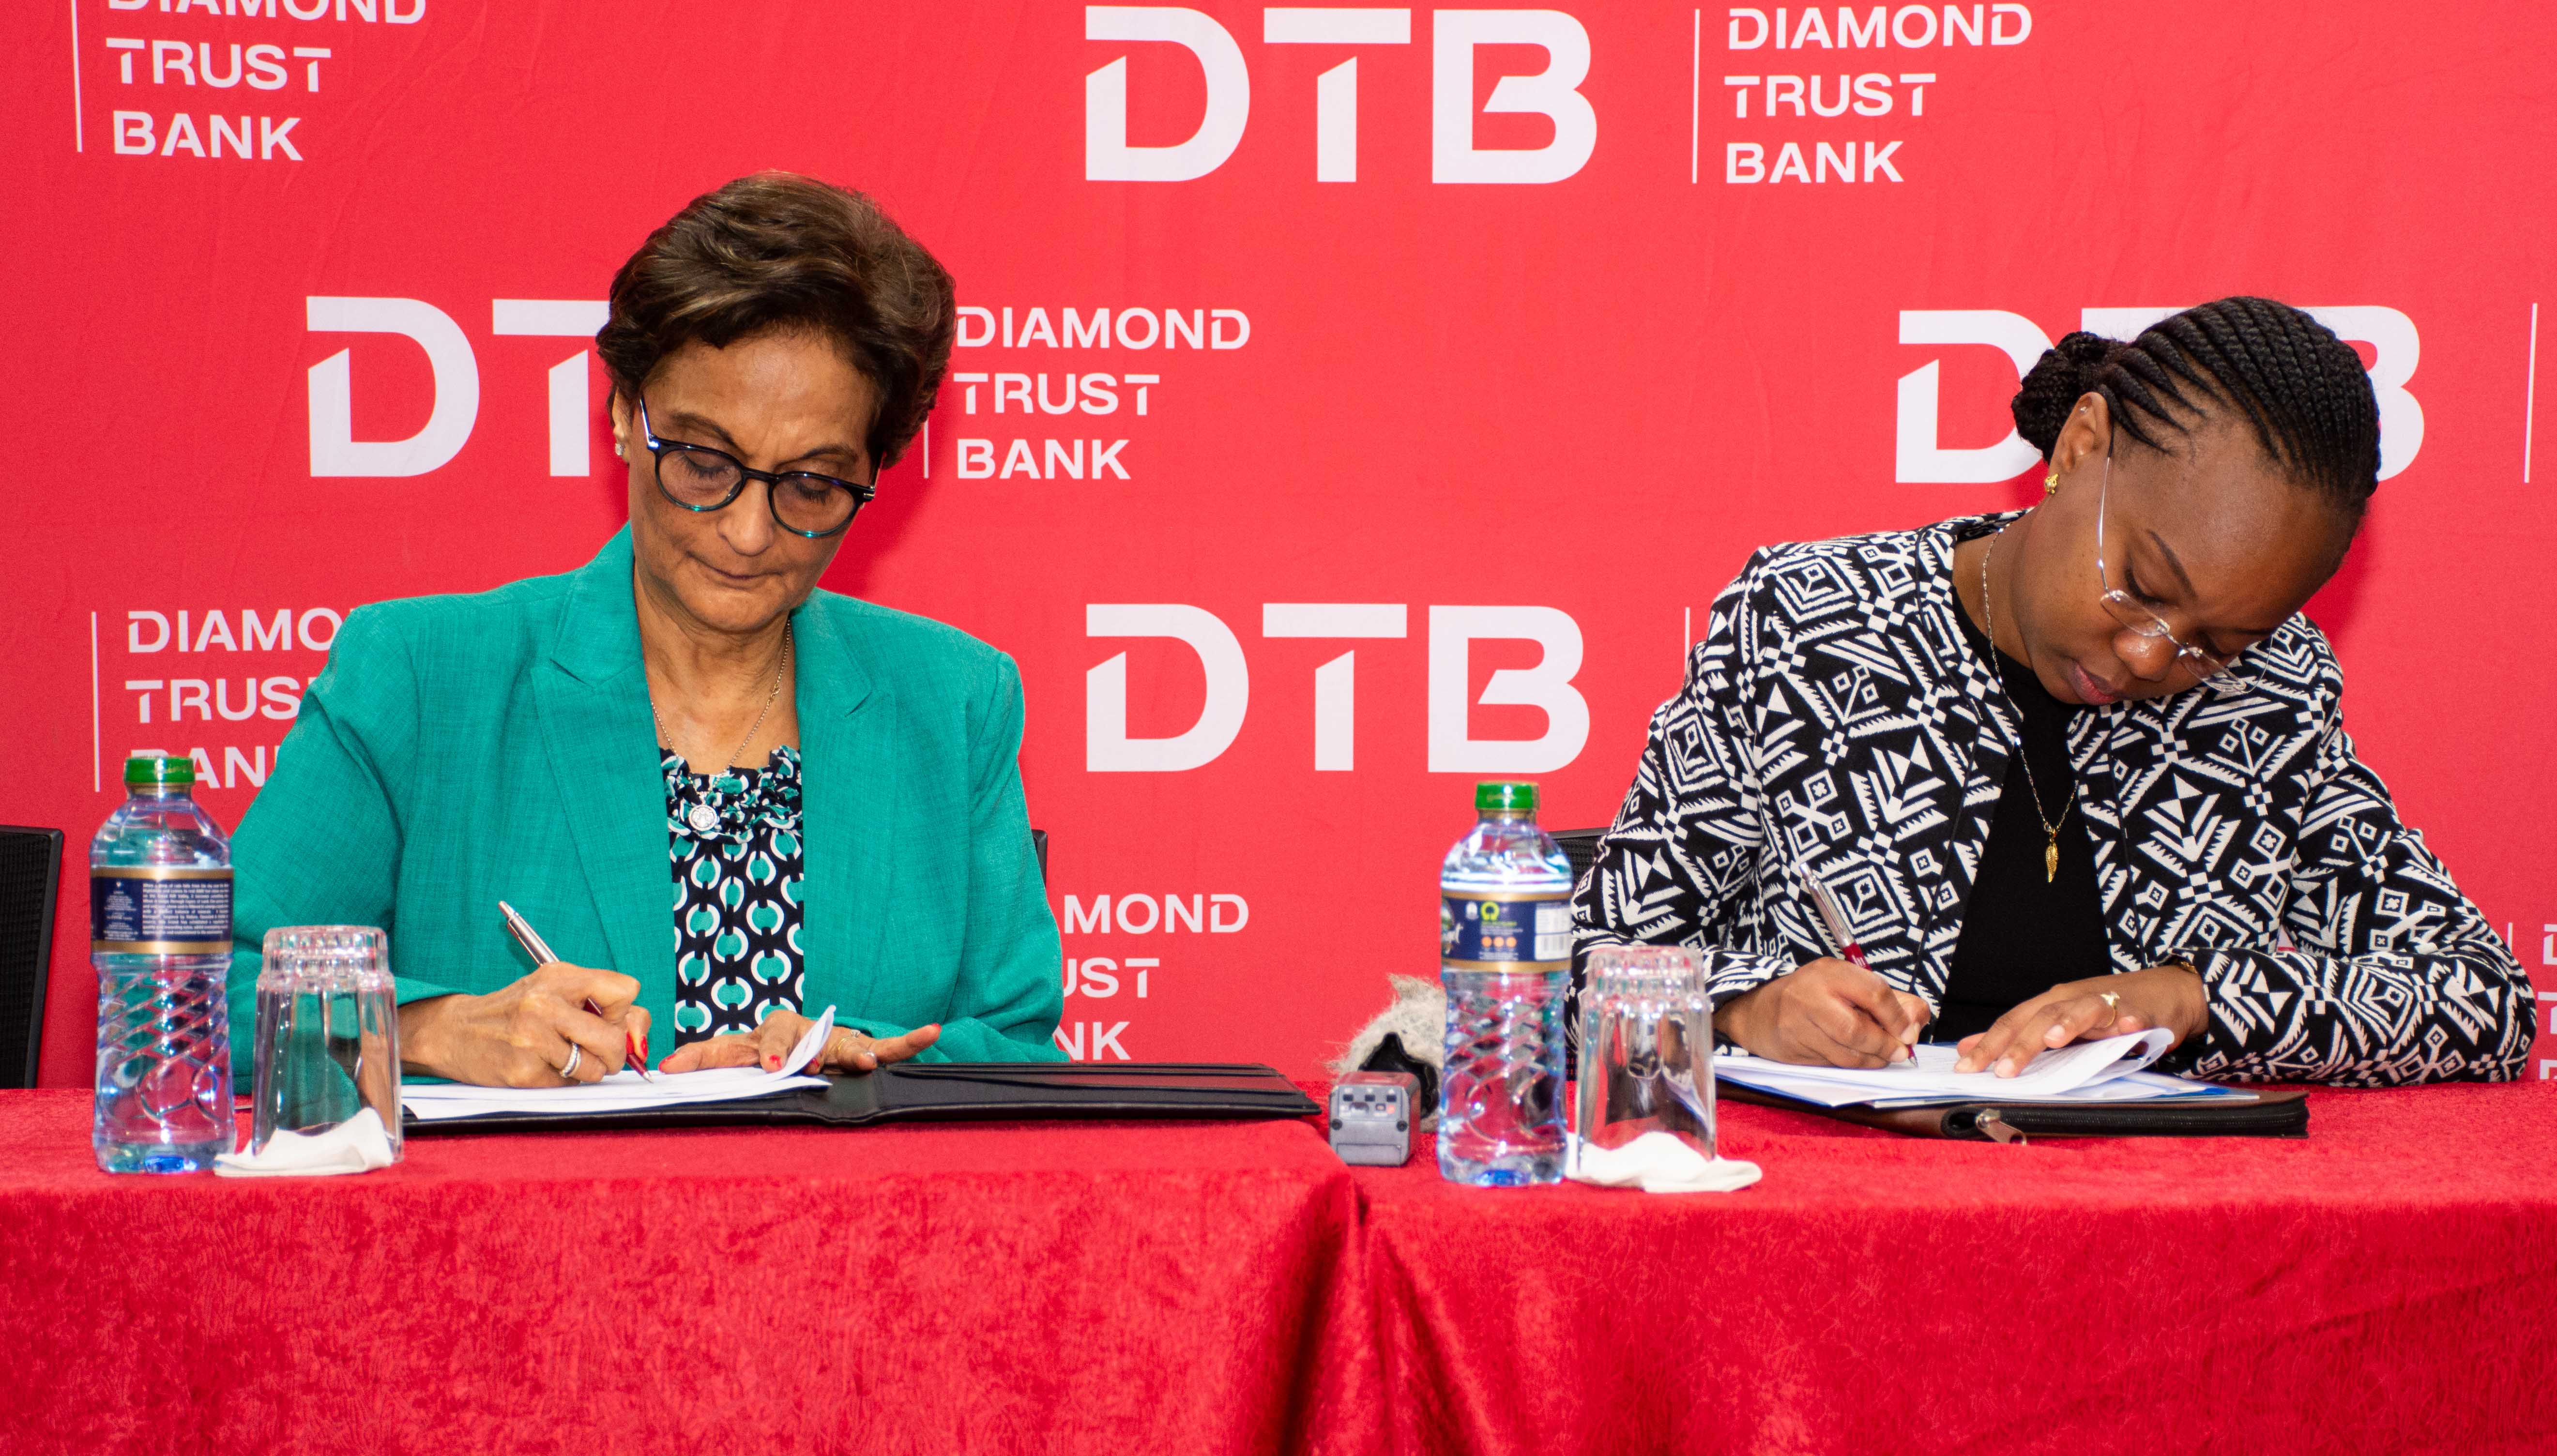 DTB Joins the United Nations Global Compact